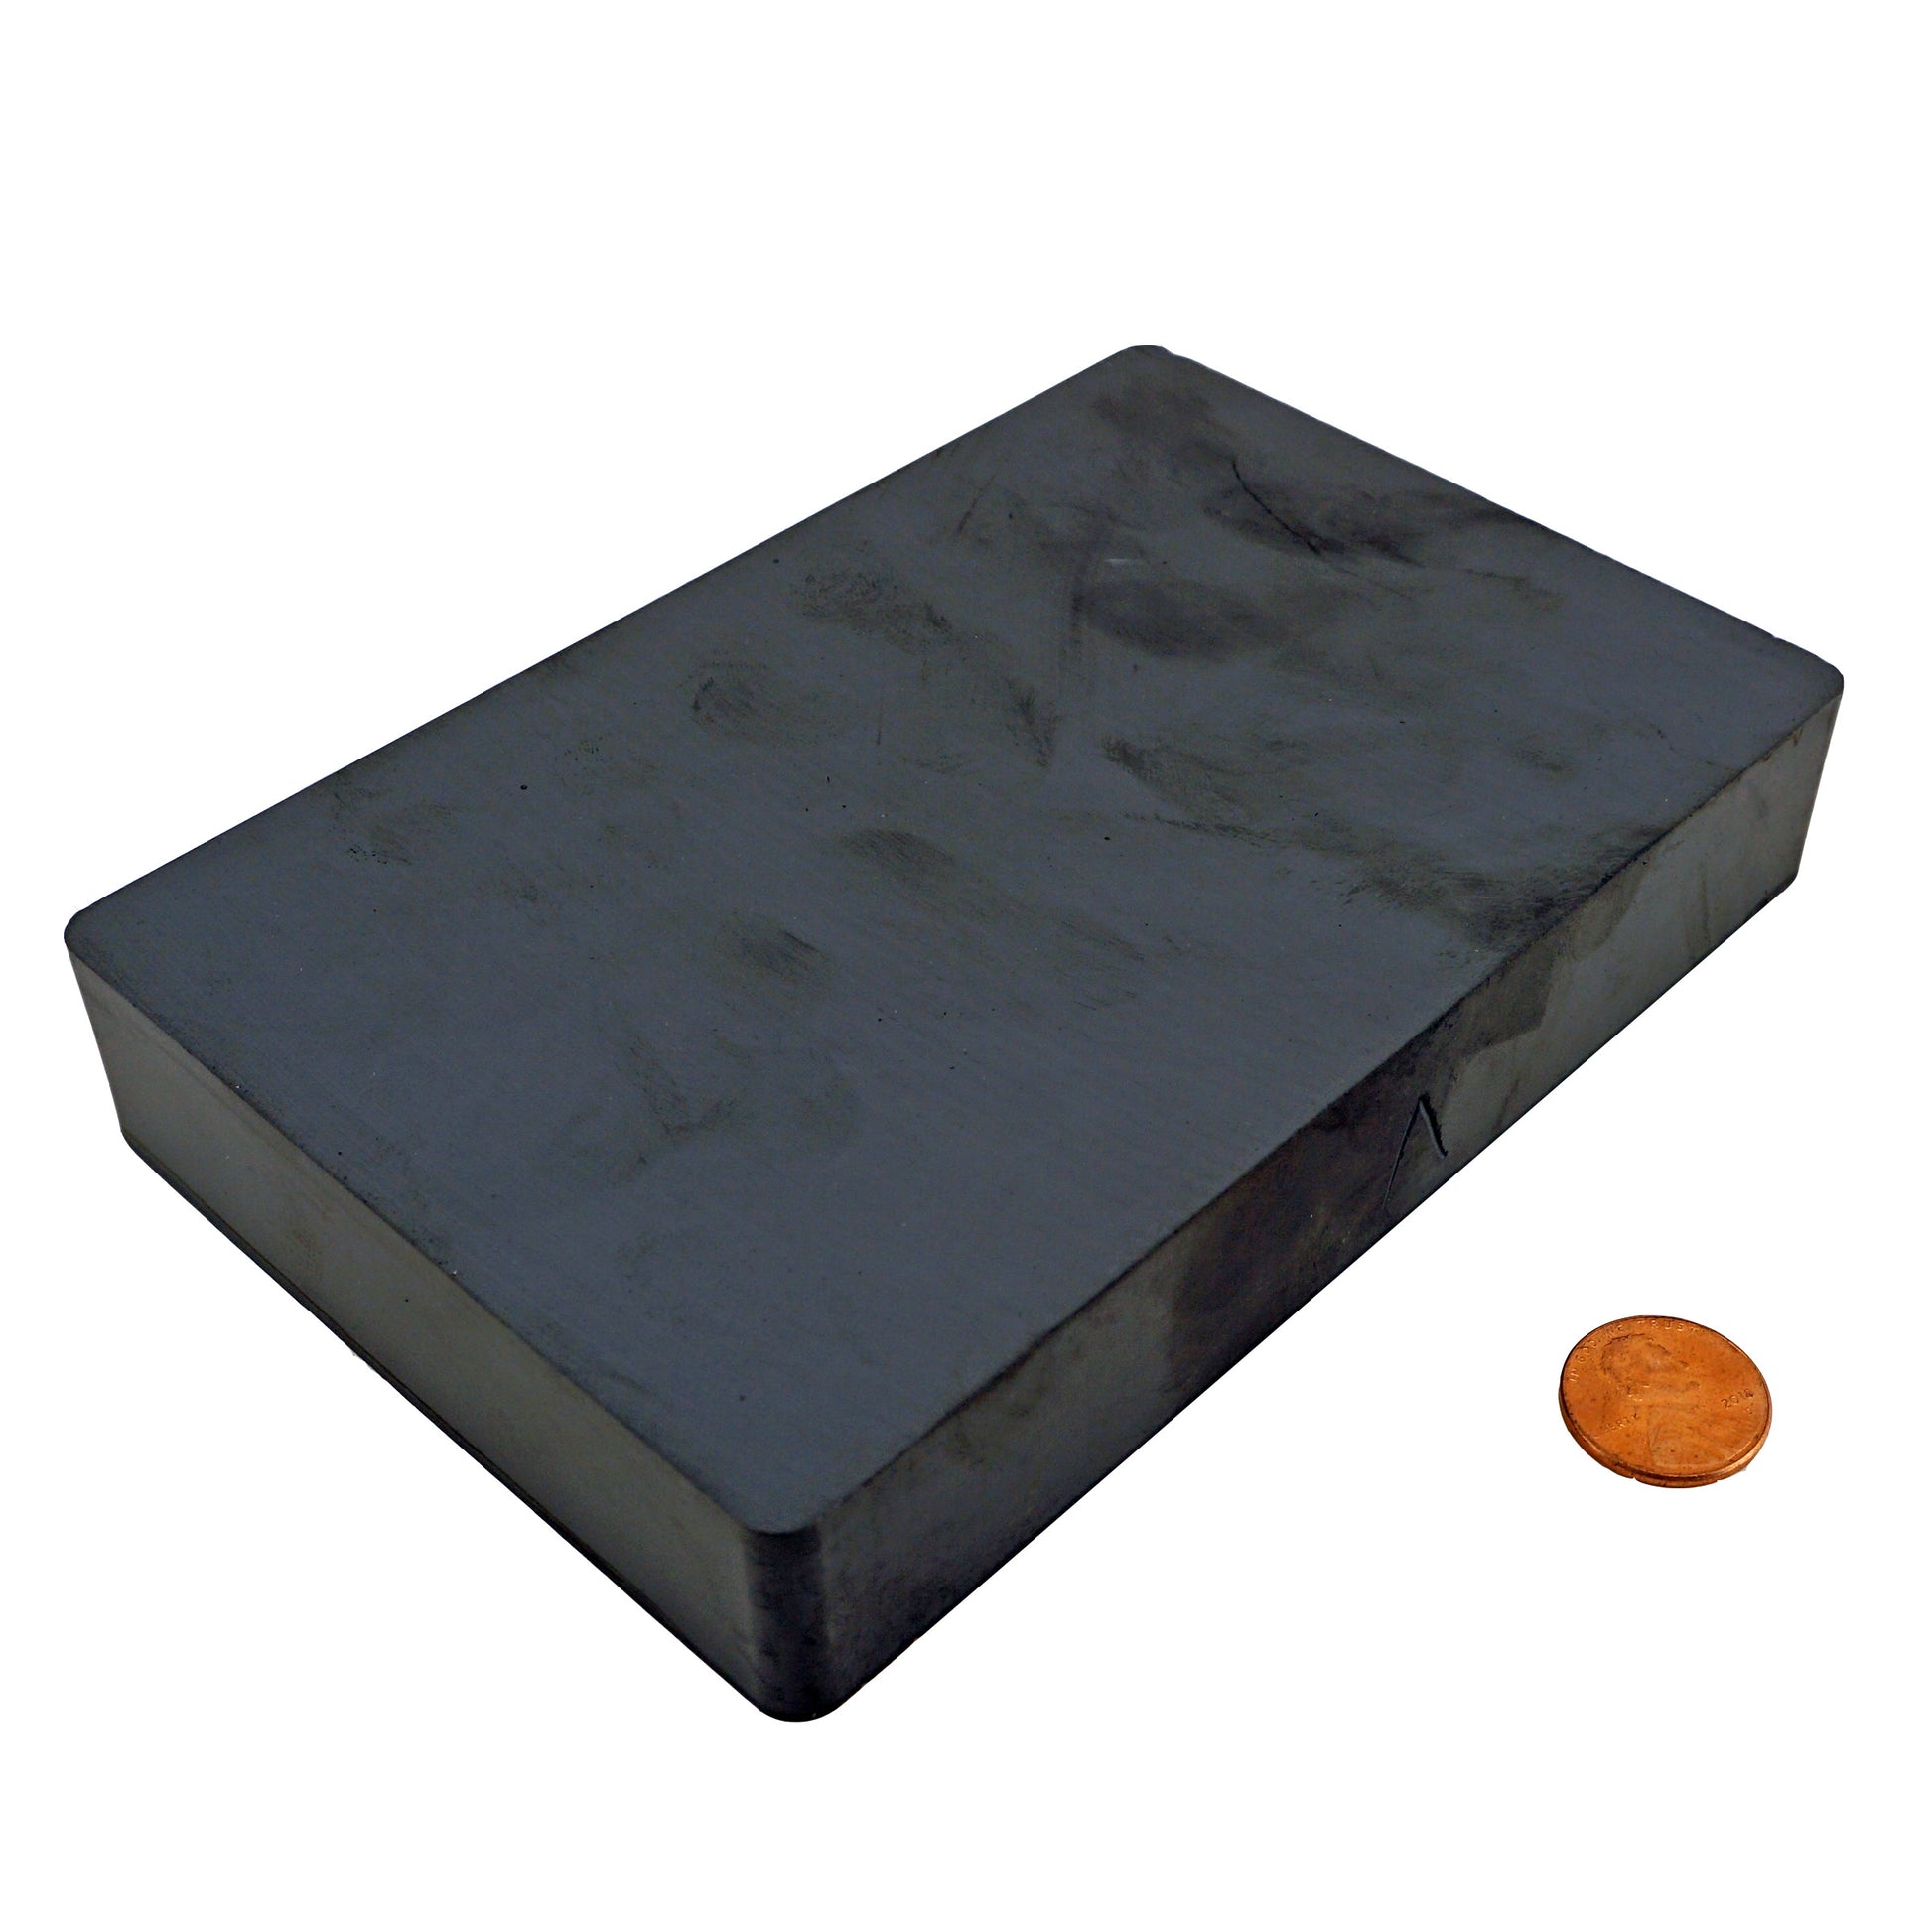 Load image into Gallery viewer, CB185CMAG Ceramic Block Magnet - 45 Degree Angle Compared to a Penny to Reference Size